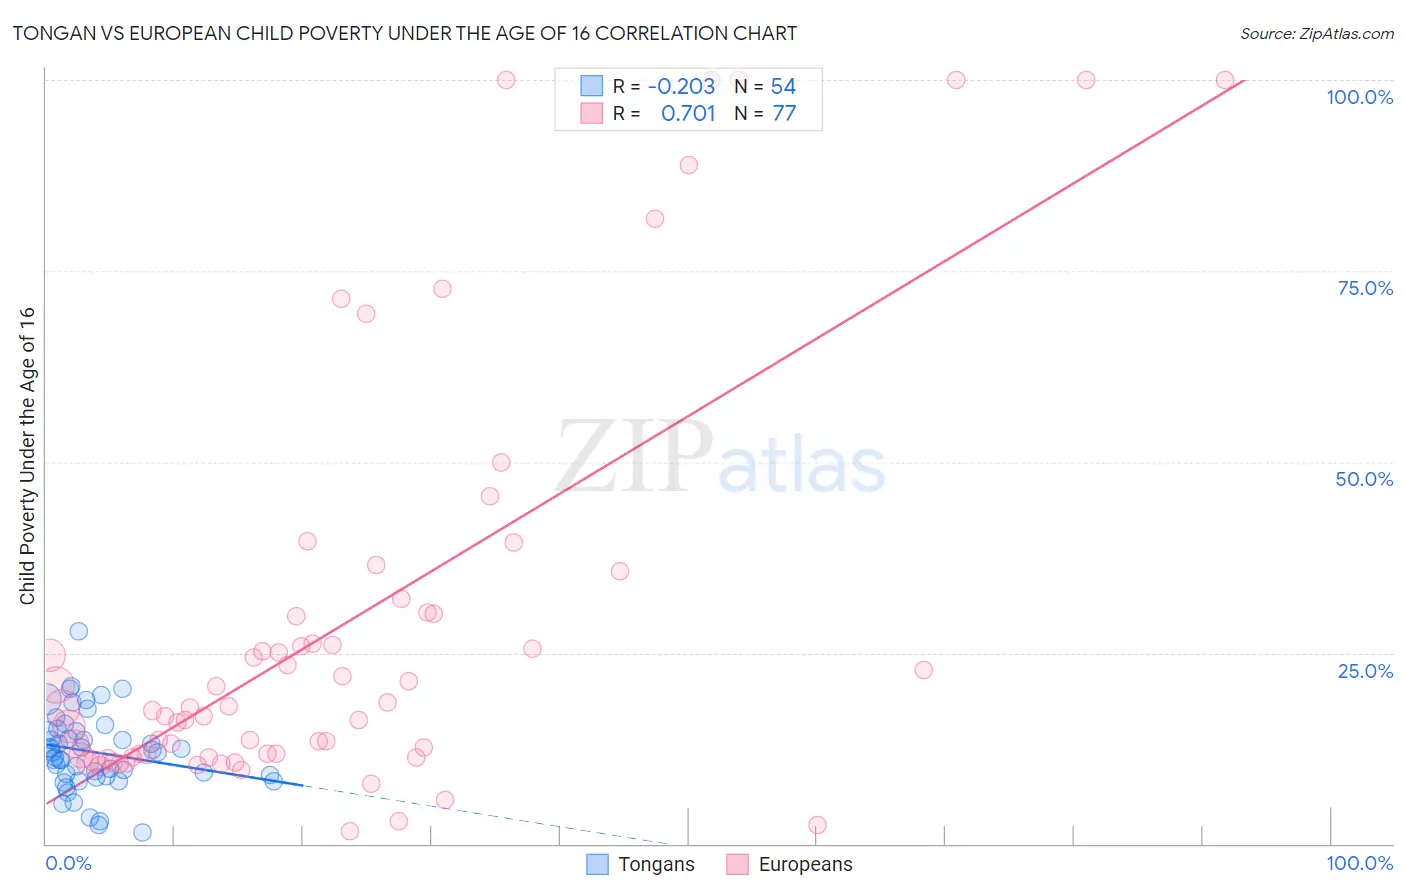 Tongan vs European Child Poverty Under the Age of 16